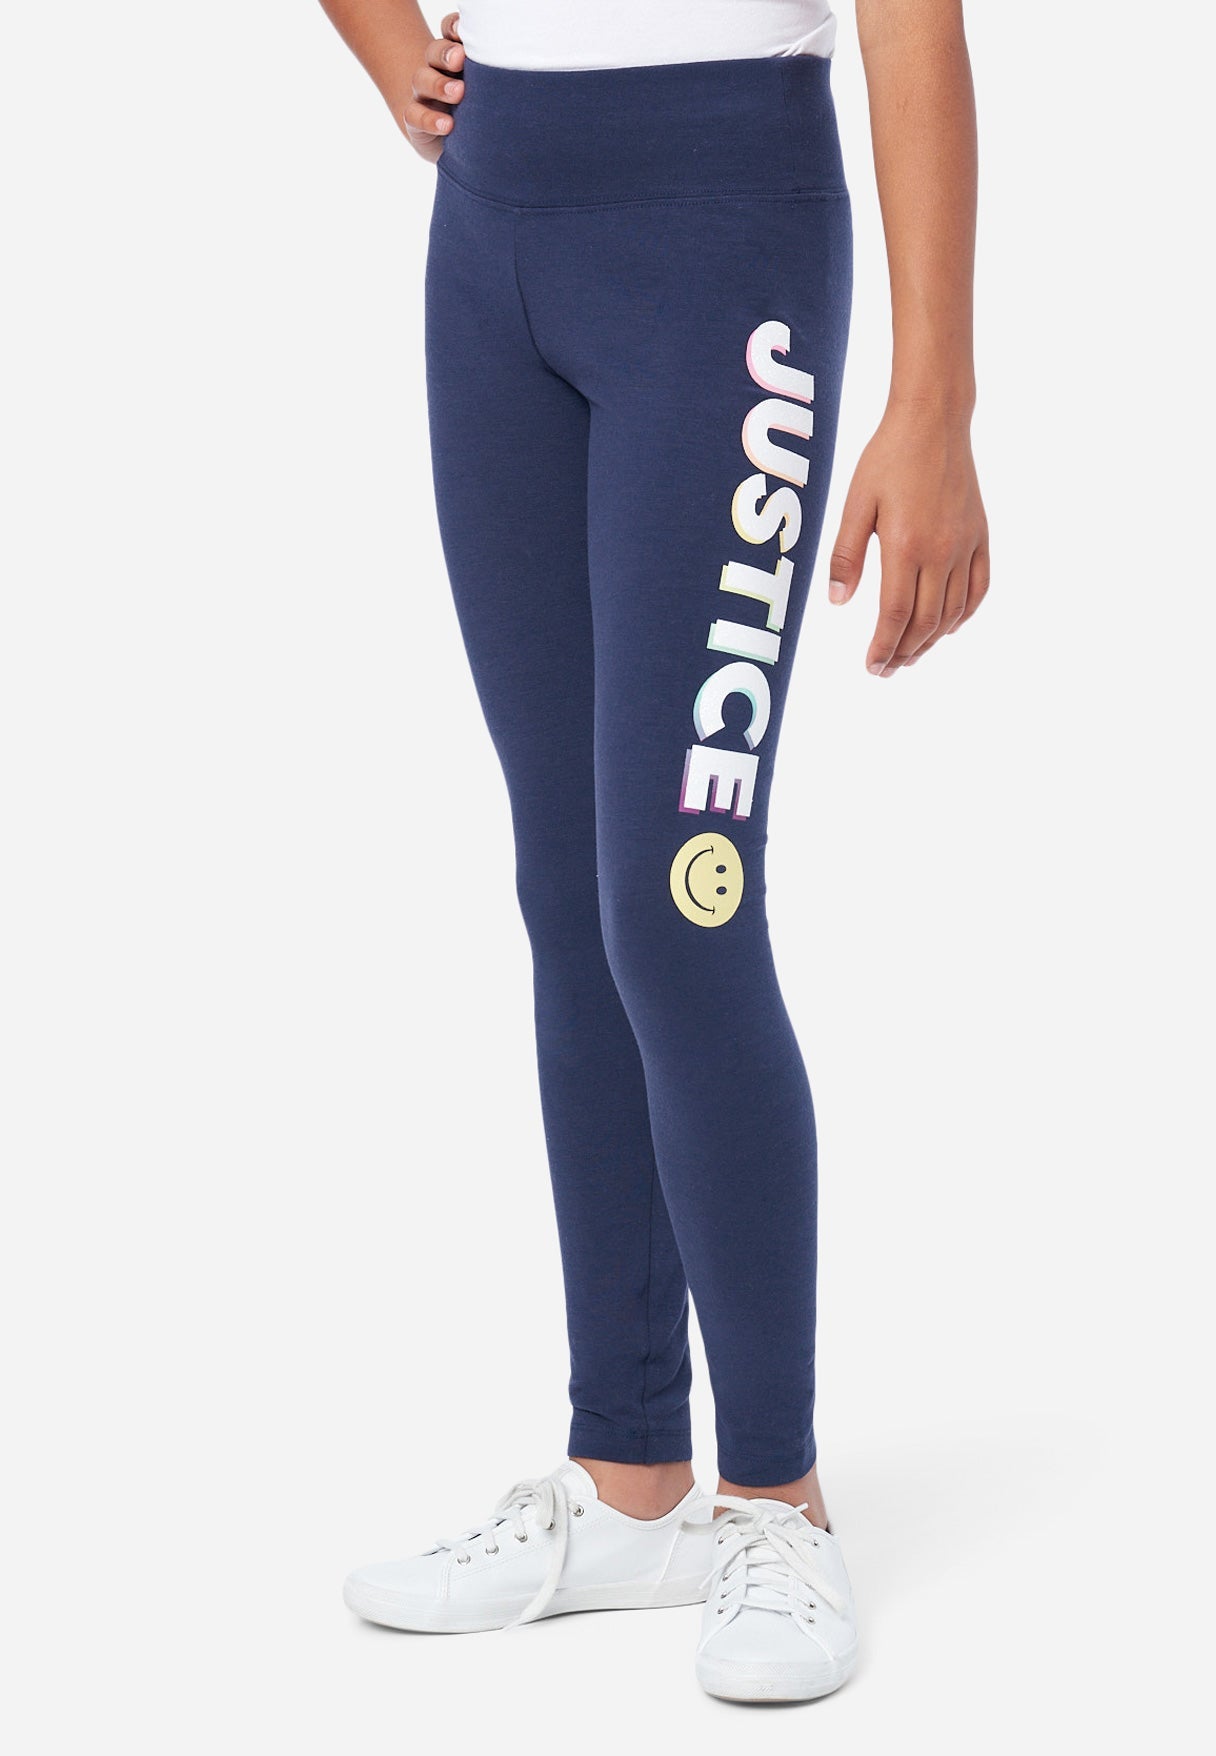 New Without Tags Tesco F&F Womens Navy Harem Jogger Leggings Size 6